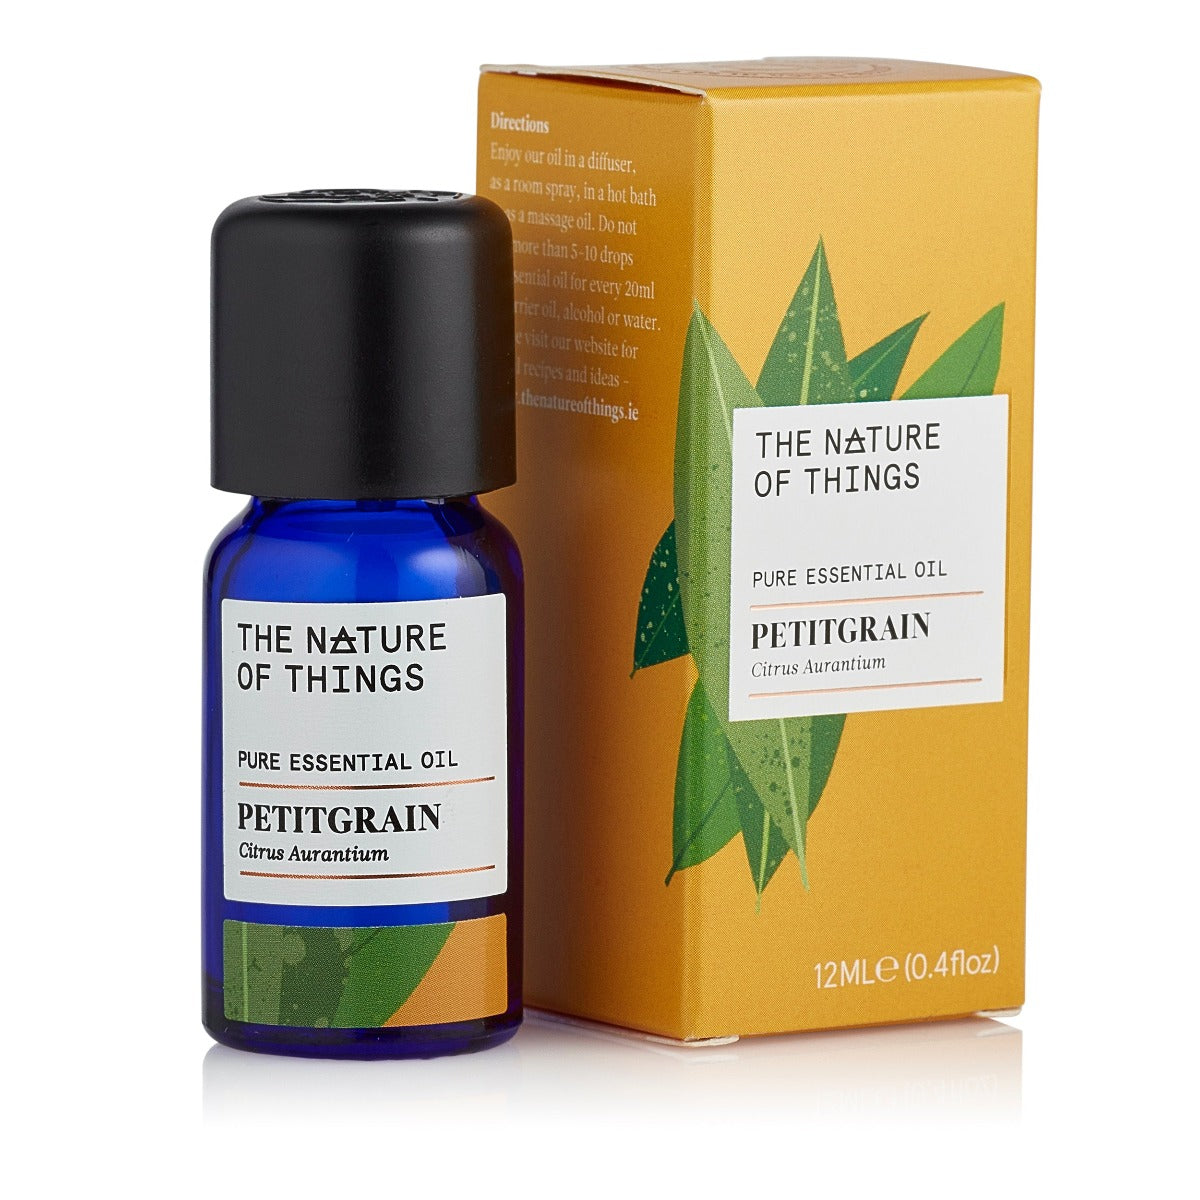 Organic Petitgrain Essential Oil from The Nature of Things